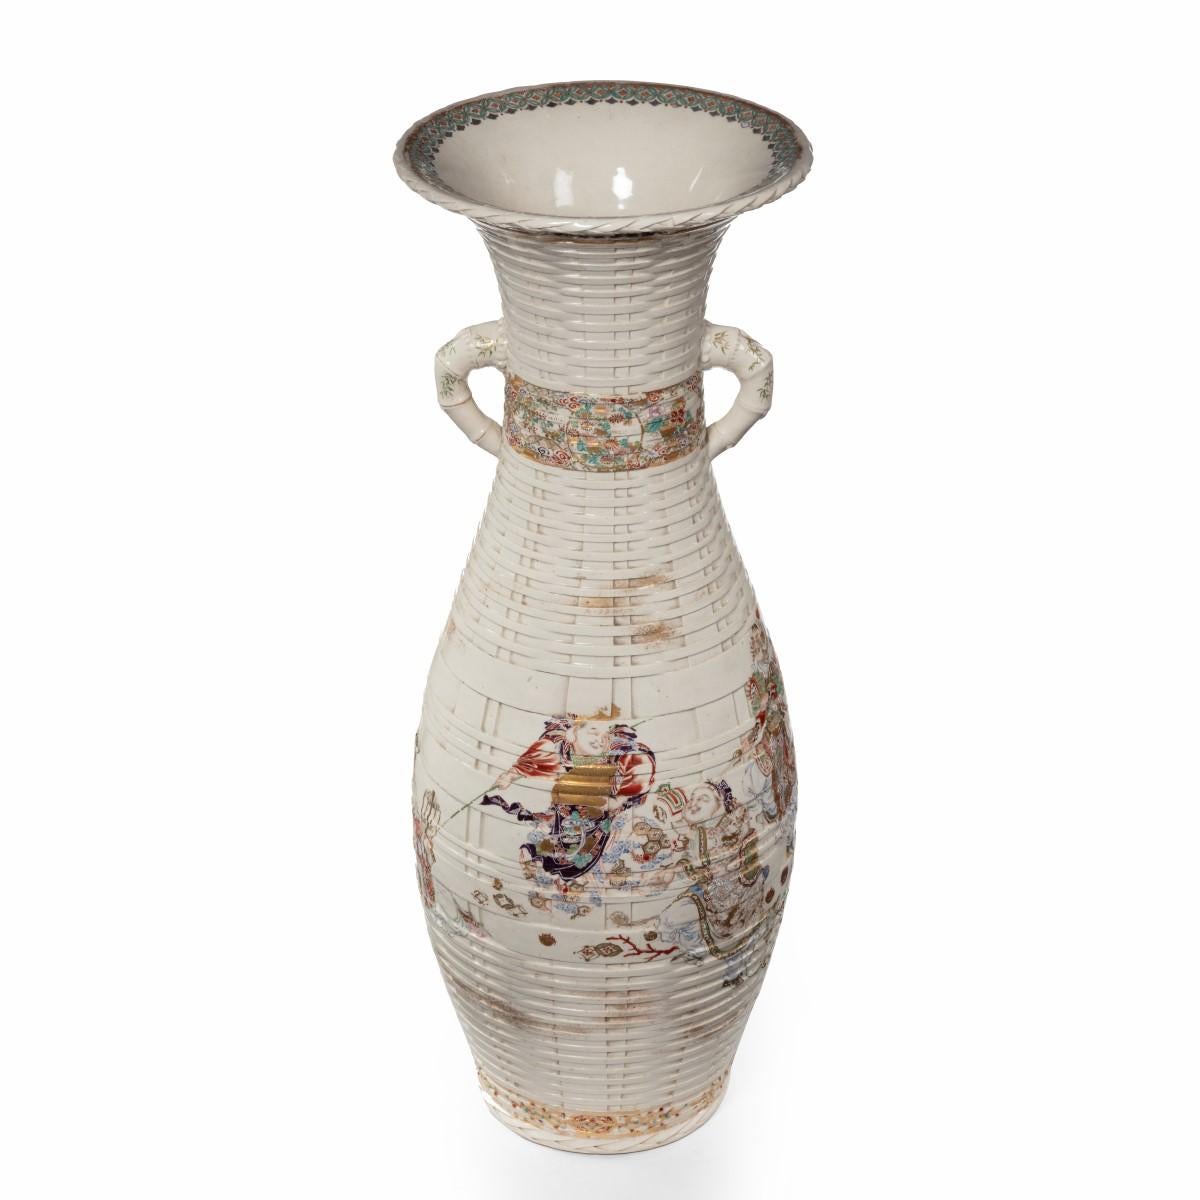 A large Meiji period Satsuma earthenware floor vase, the skittle shaped body painted in pastel overglaze enamels and gilding with a continuous frieze of the Seven Gods of Good Fortune on an intricate basketweave ground. Japanese, circa 1875.

For